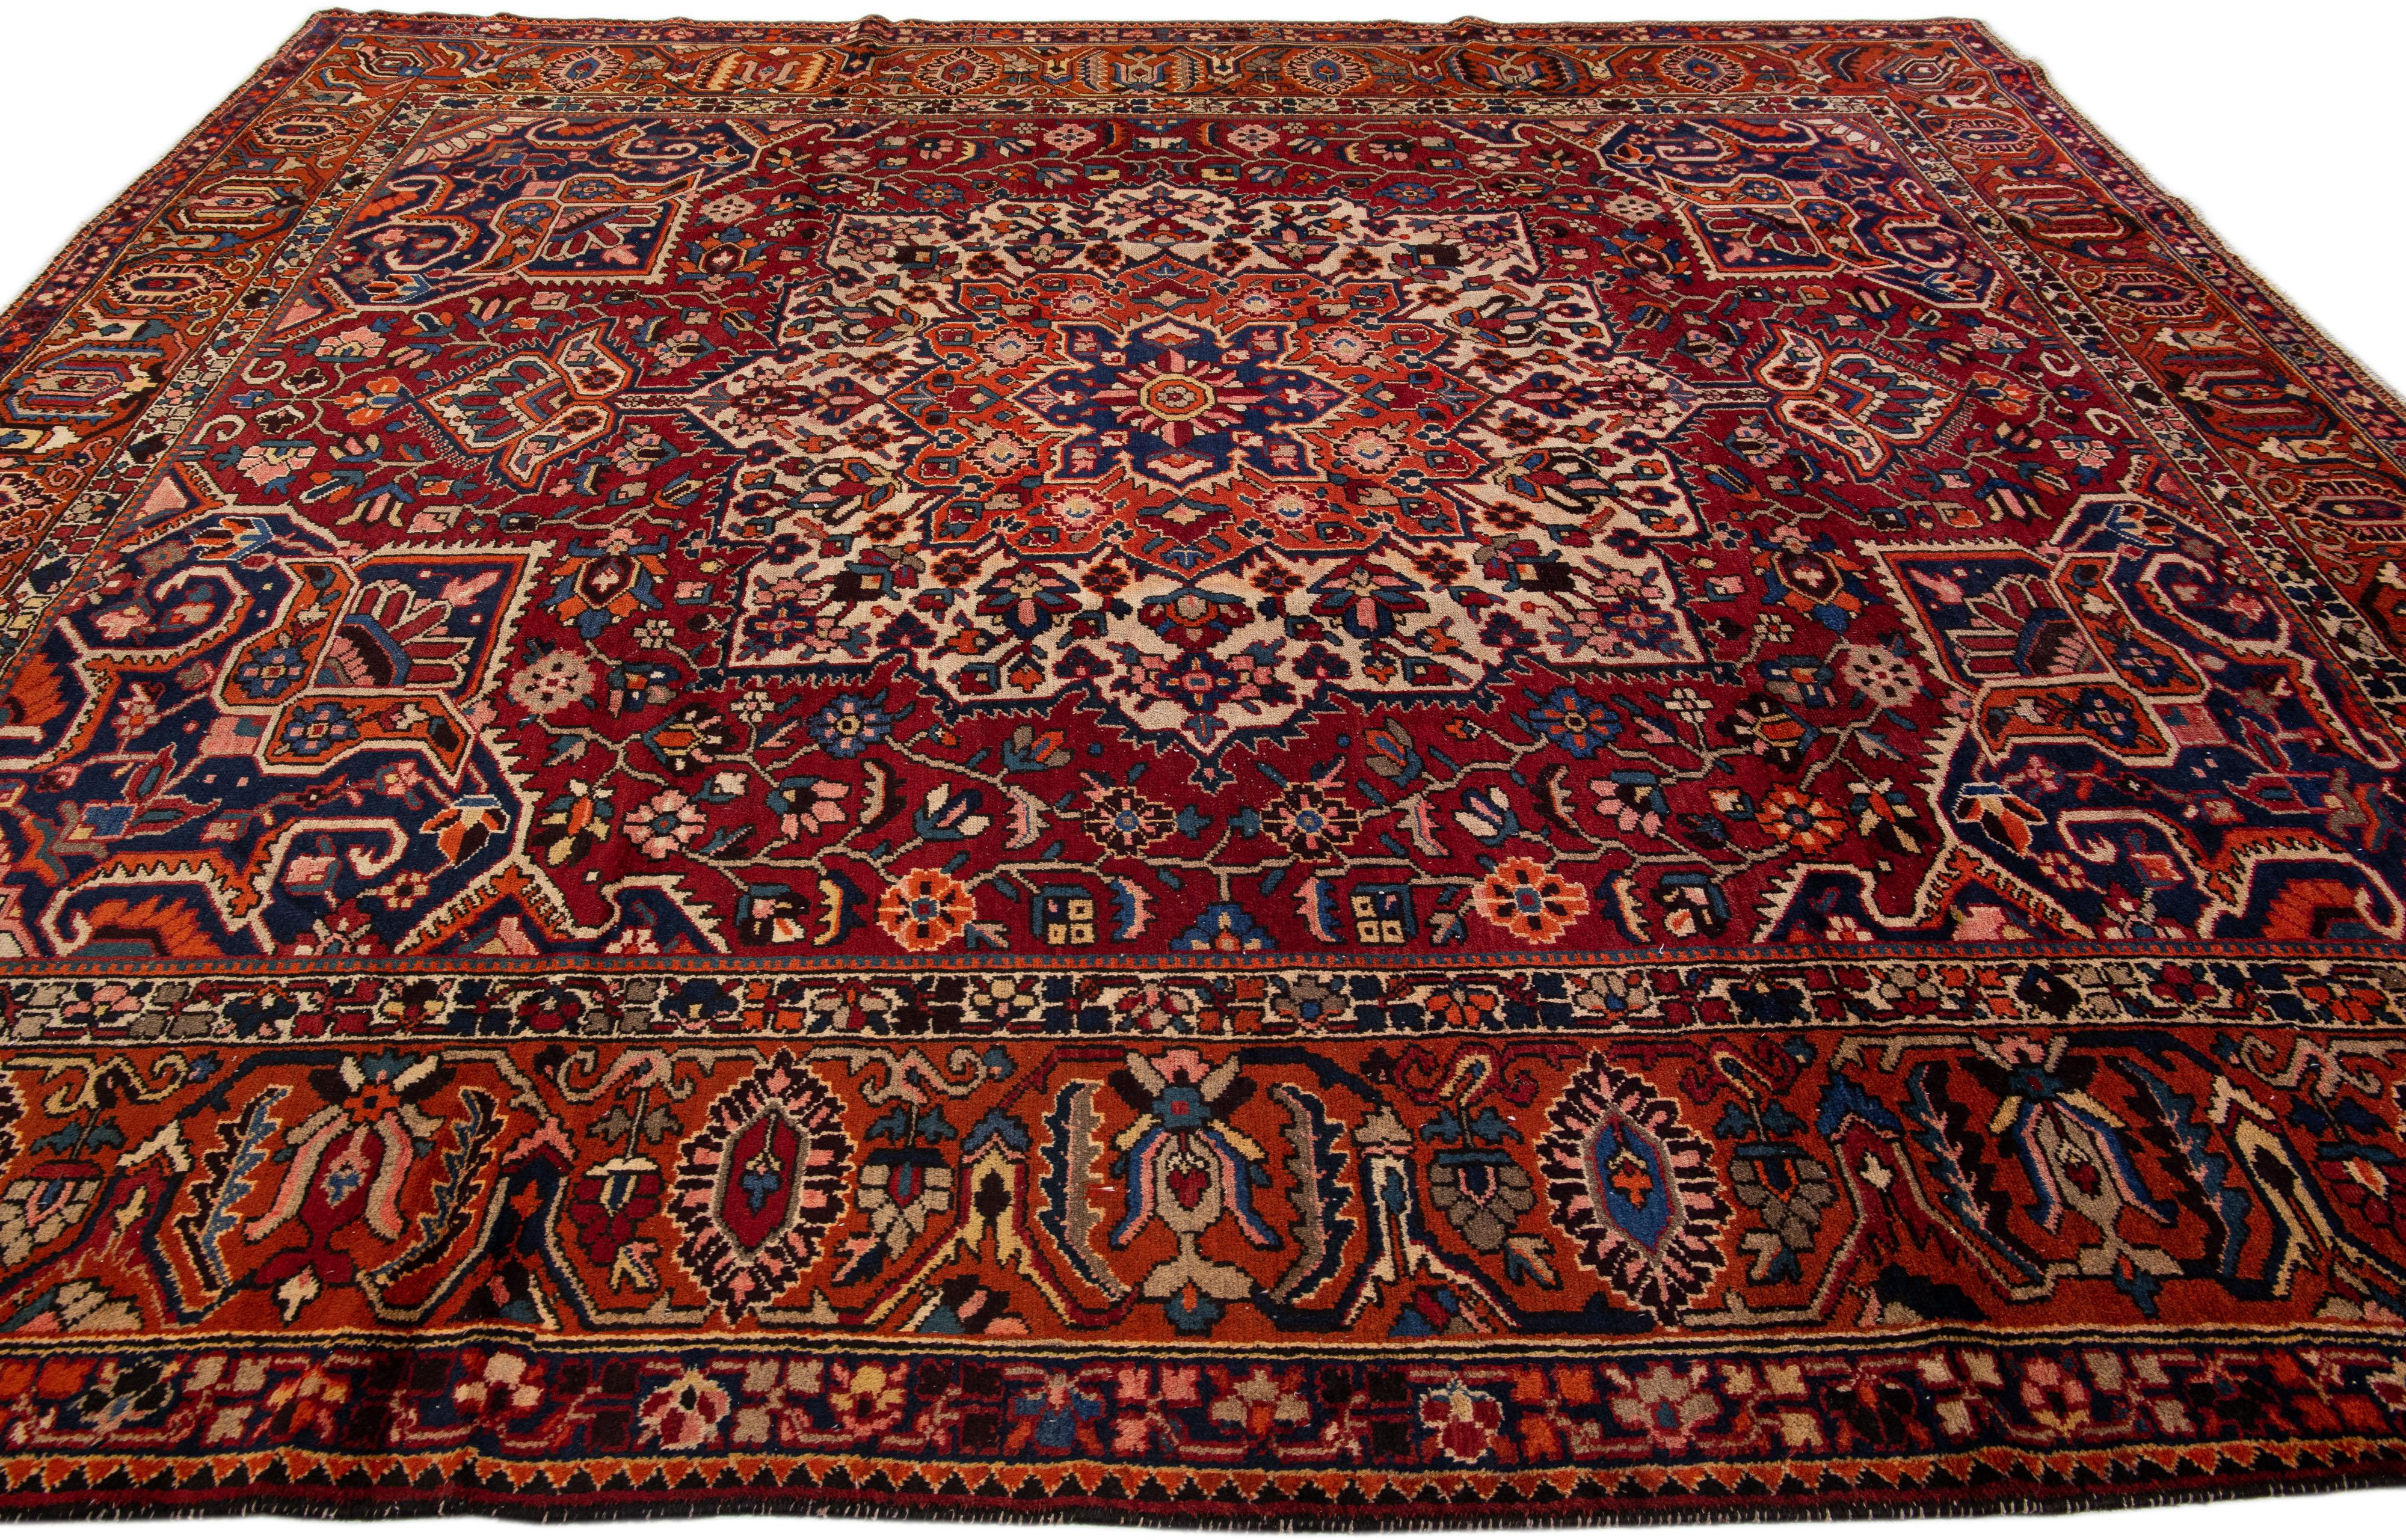 Beautiful antique Bakhtiari hand-knotted wool rug with a red field. This Persian piece has an all-over multicolor accent in a gorgeous classic Medallion motif.

This rug measures 11'2